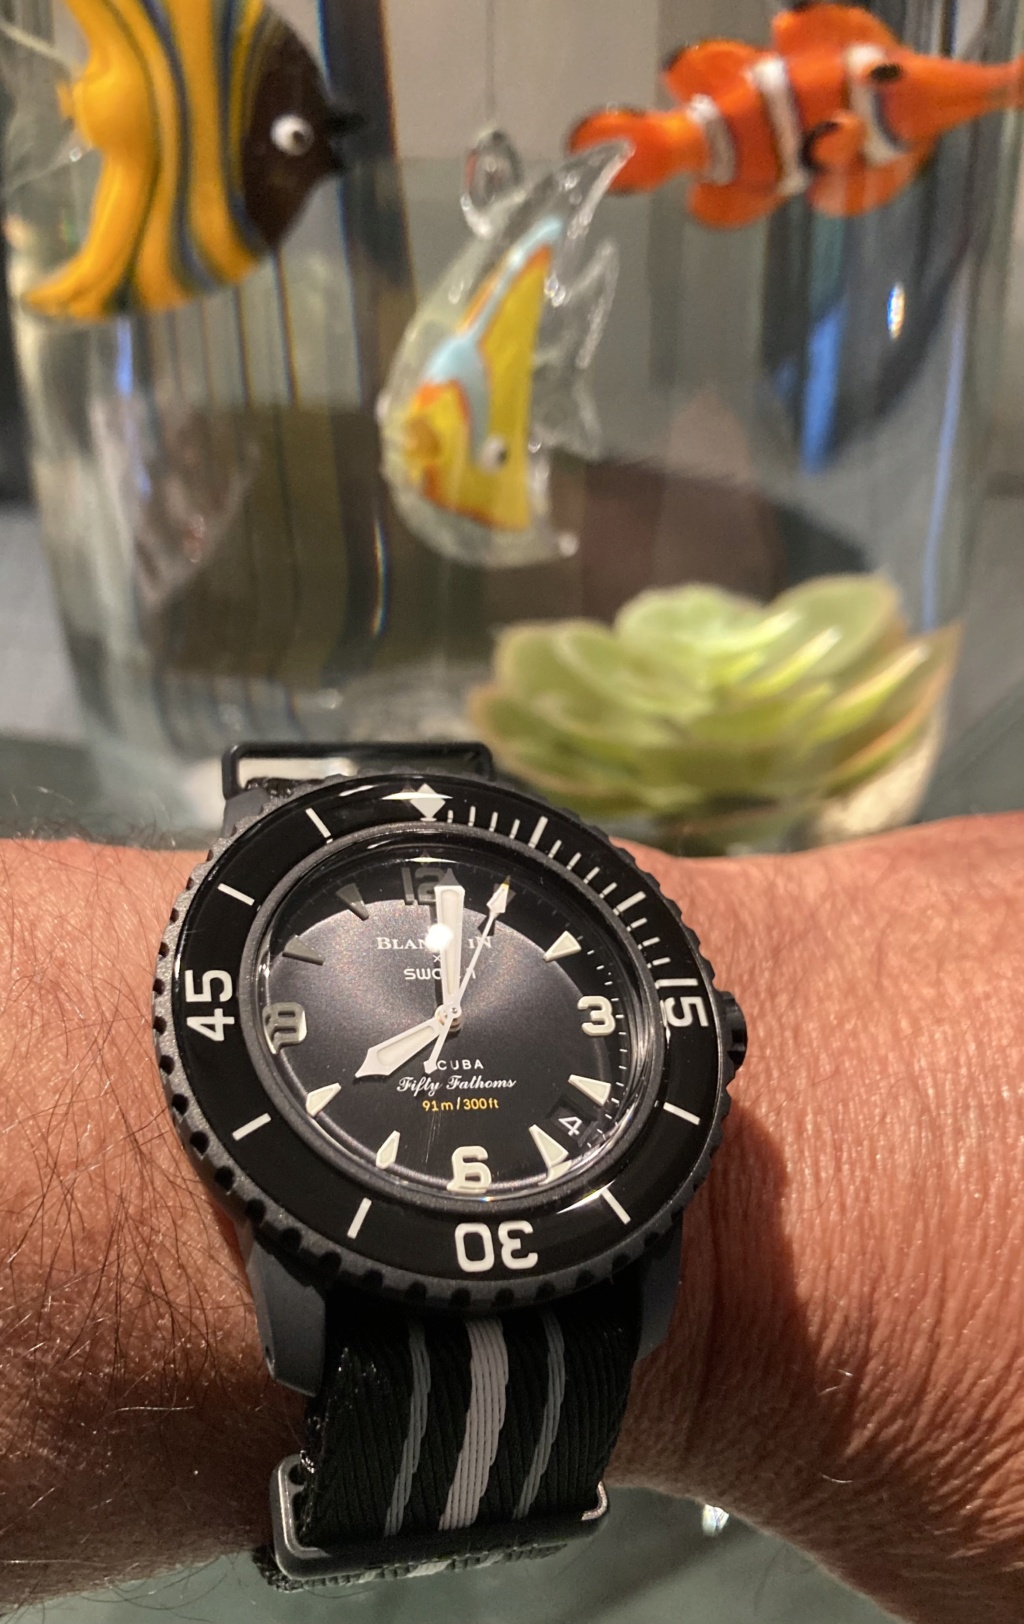 Blancpain X Swatch ? - Page 11 Img_2217